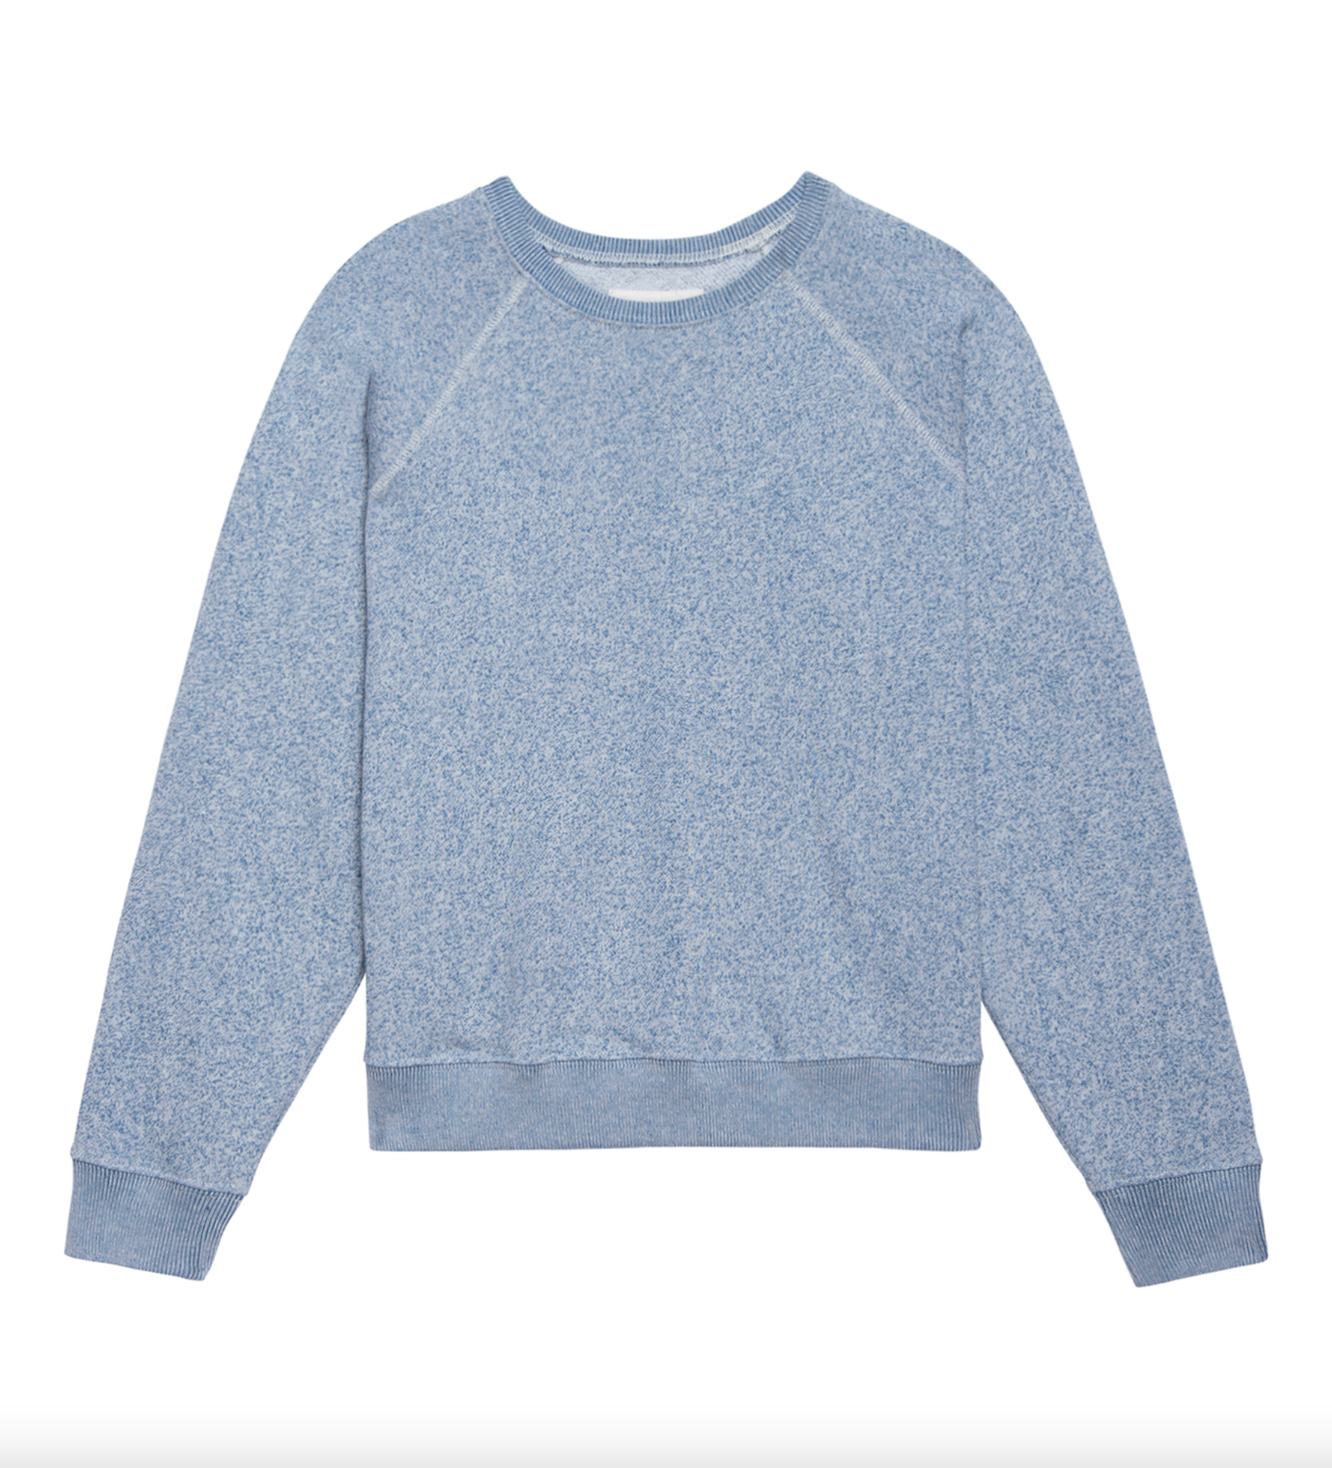 A light blue, crew neck sweatshirt with long sleeves, THE SHRUNKEN SWEATSHIRT HEATHERED COASTLINE BLUE, displayed on a white background. The fabric features a subtle, Arizona-style textured pattern. Brand: The Great Inc.